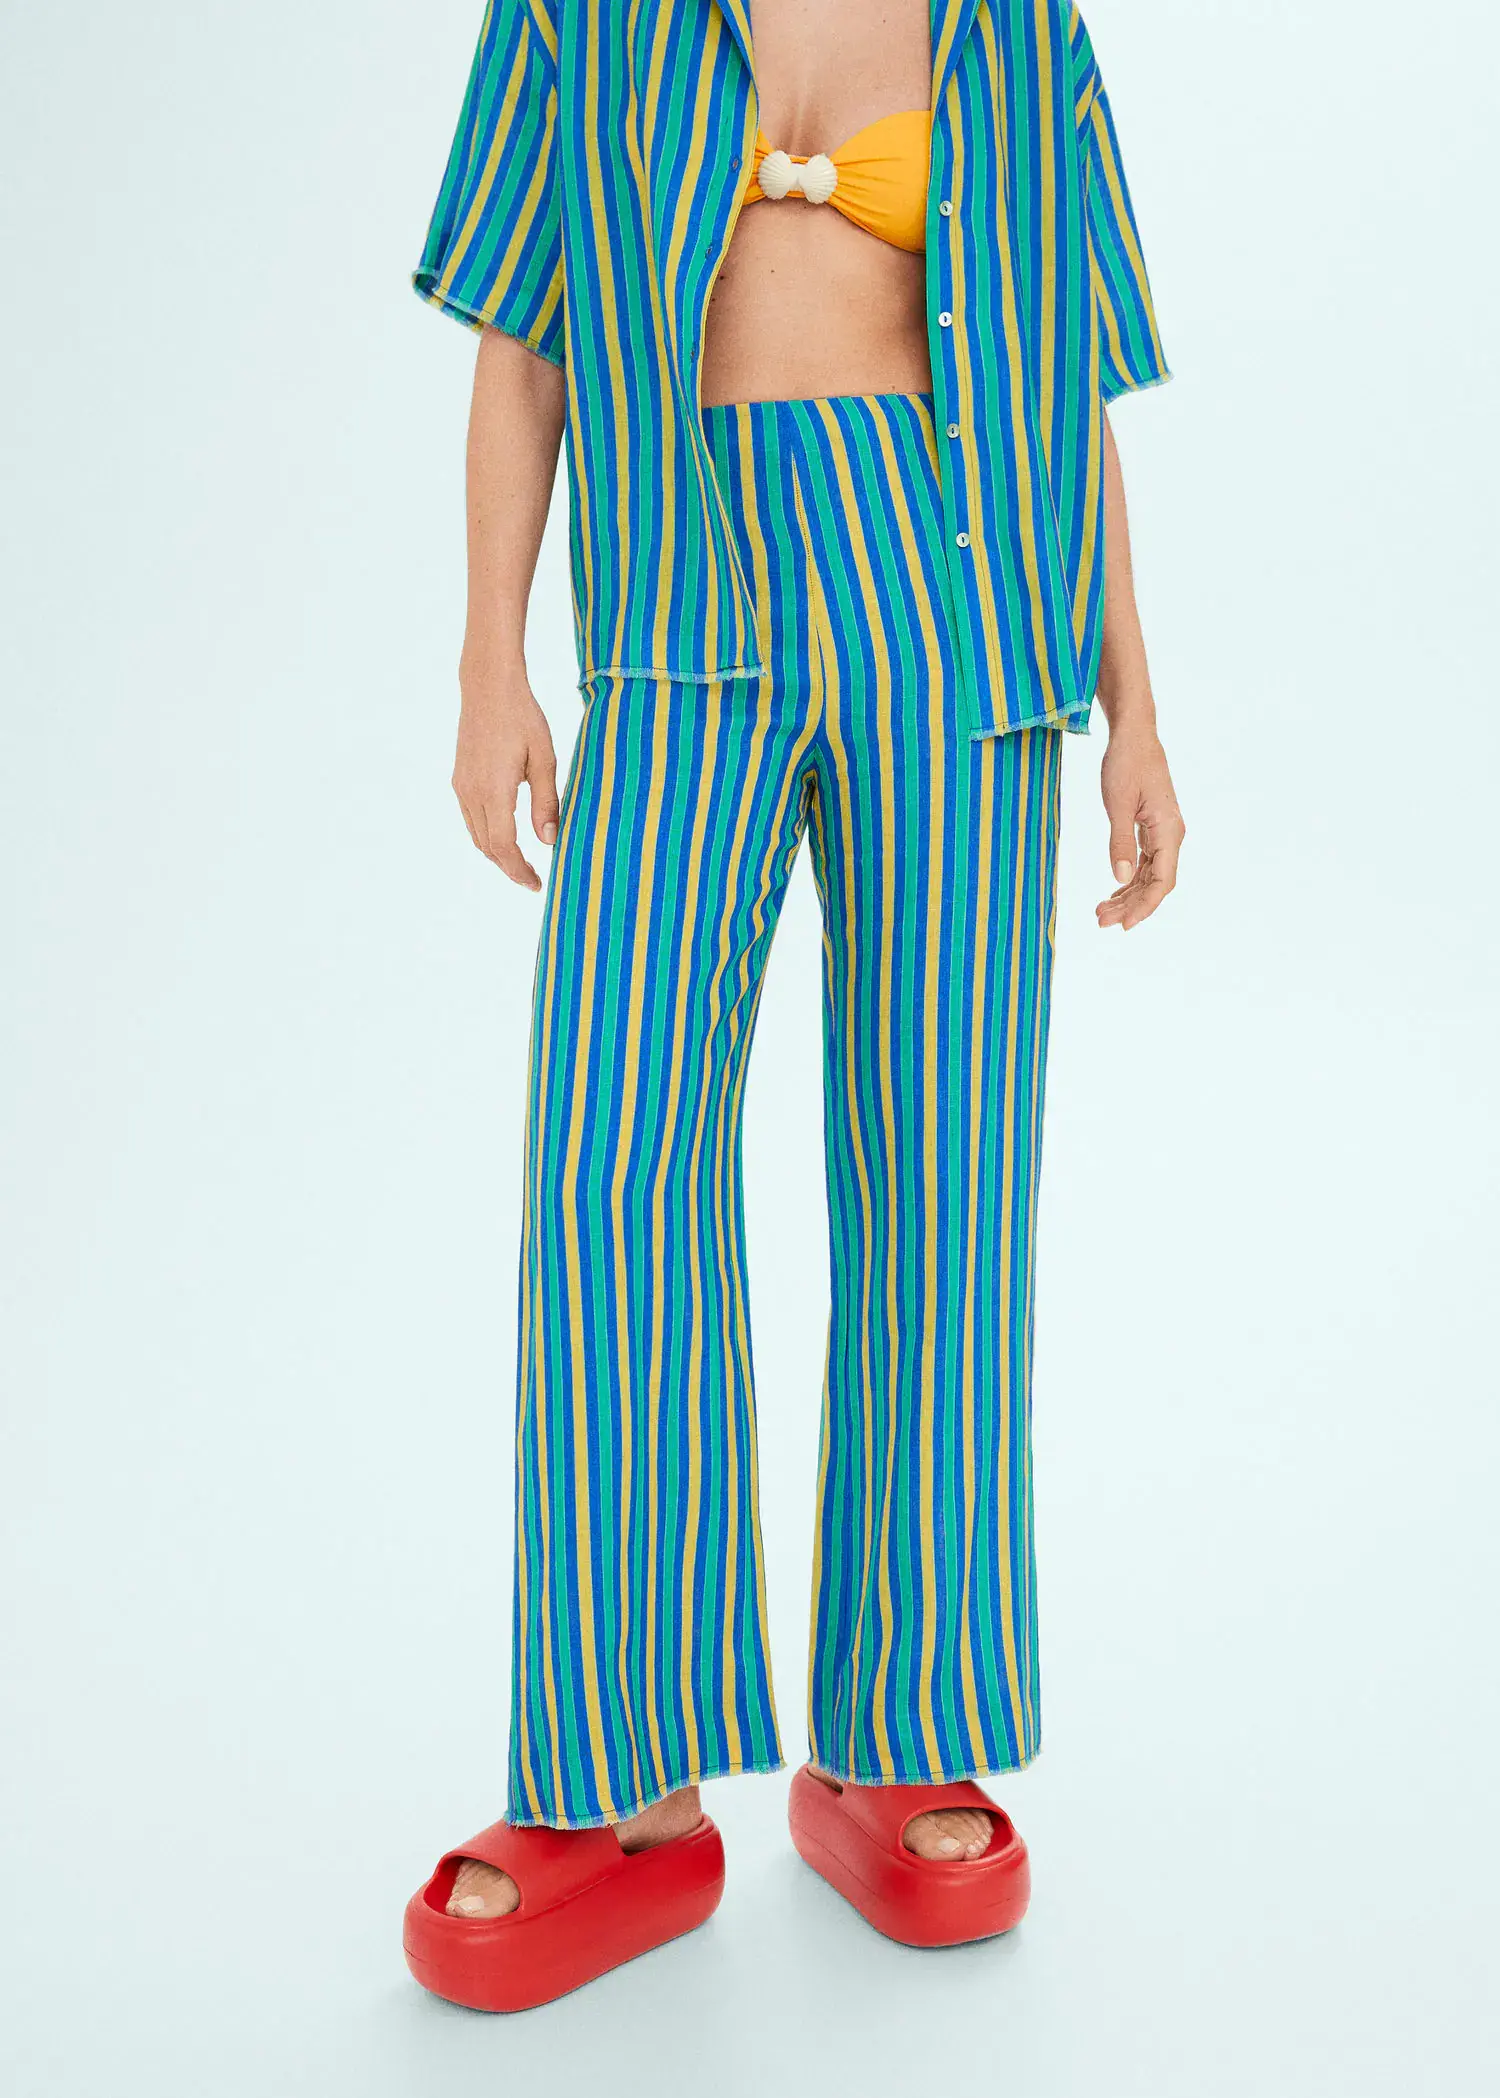 Mango Multi-colored striped linen pants. a person standing in a room wearing a blue and yellow striped outfit. 